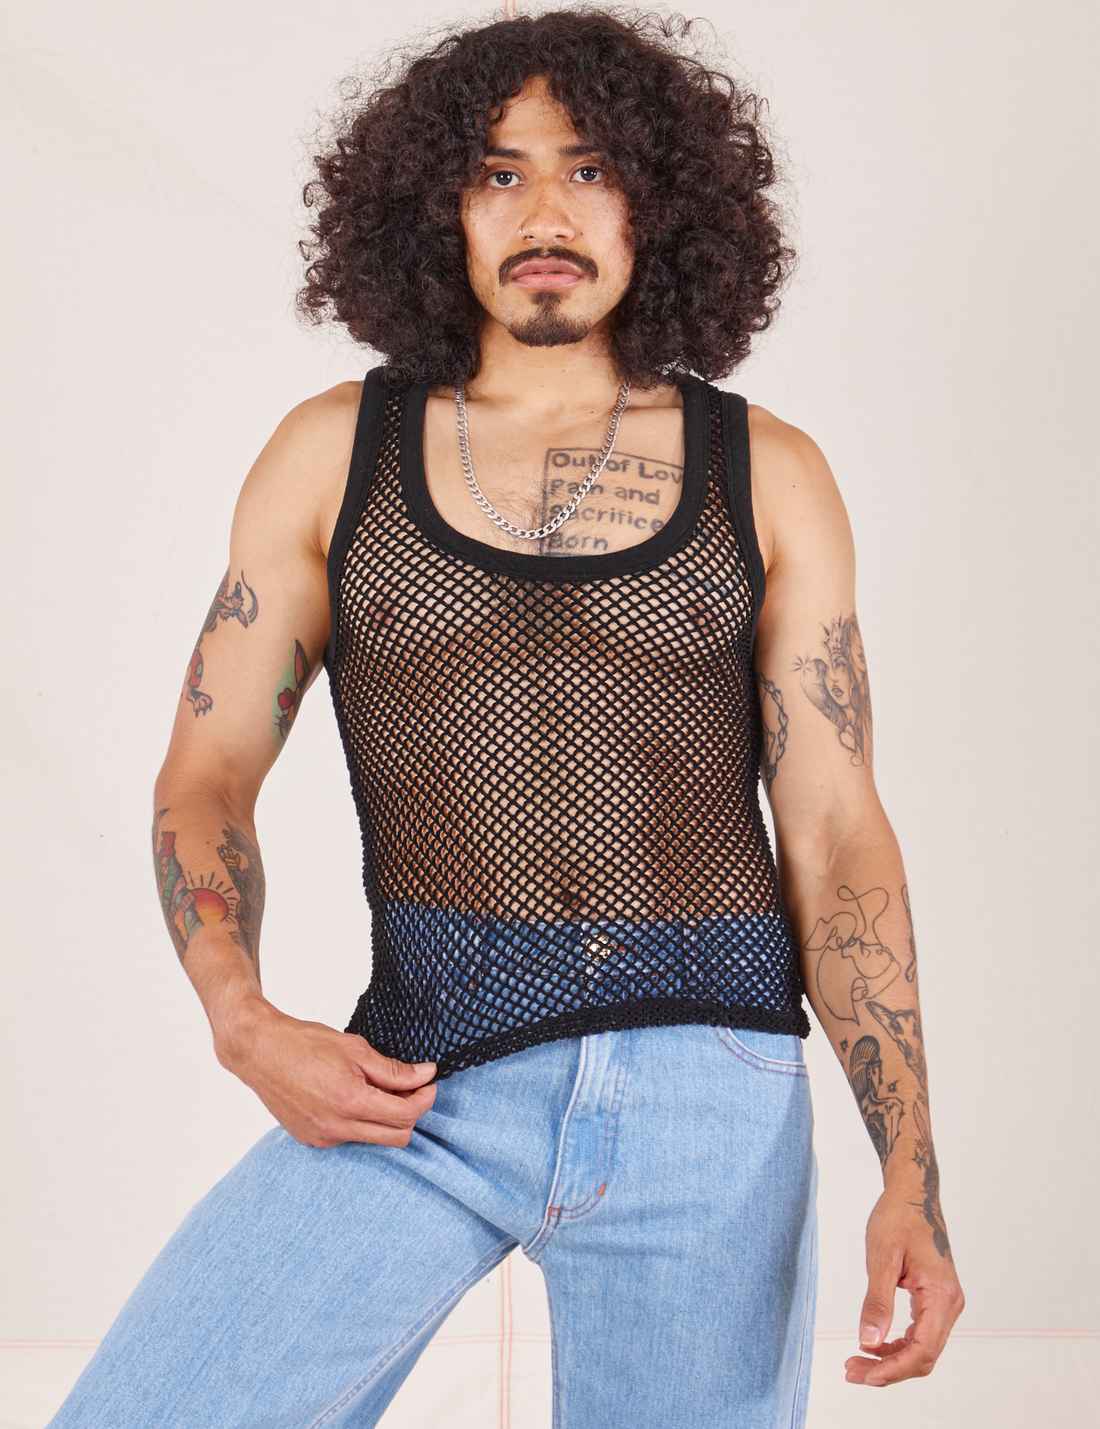 Jesse is 5'8" and wearing XS Mesh Tank Top in Basic Black